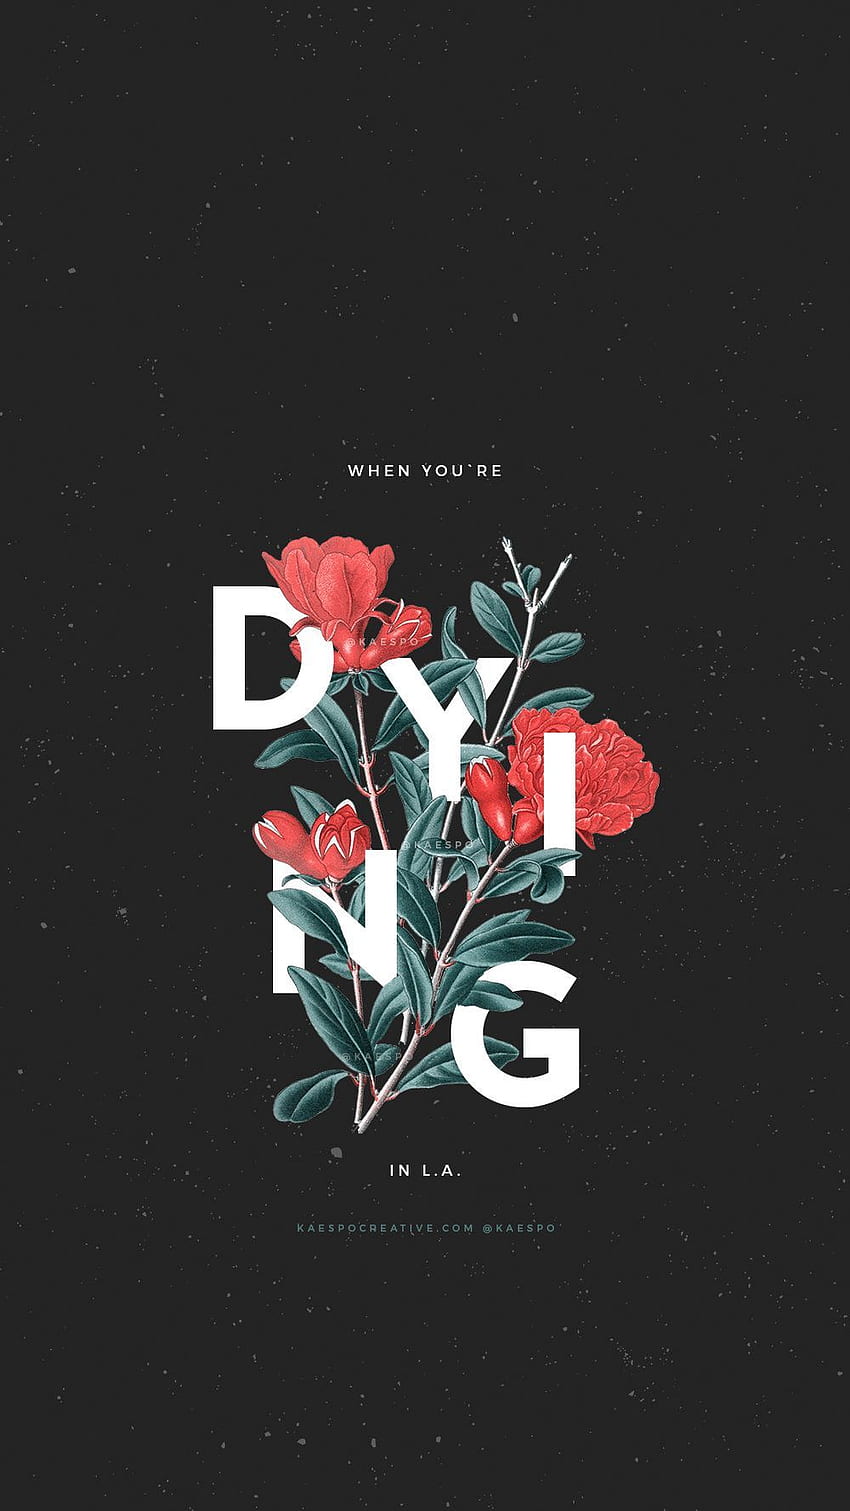 The image of dying flowers on a black background - Punk